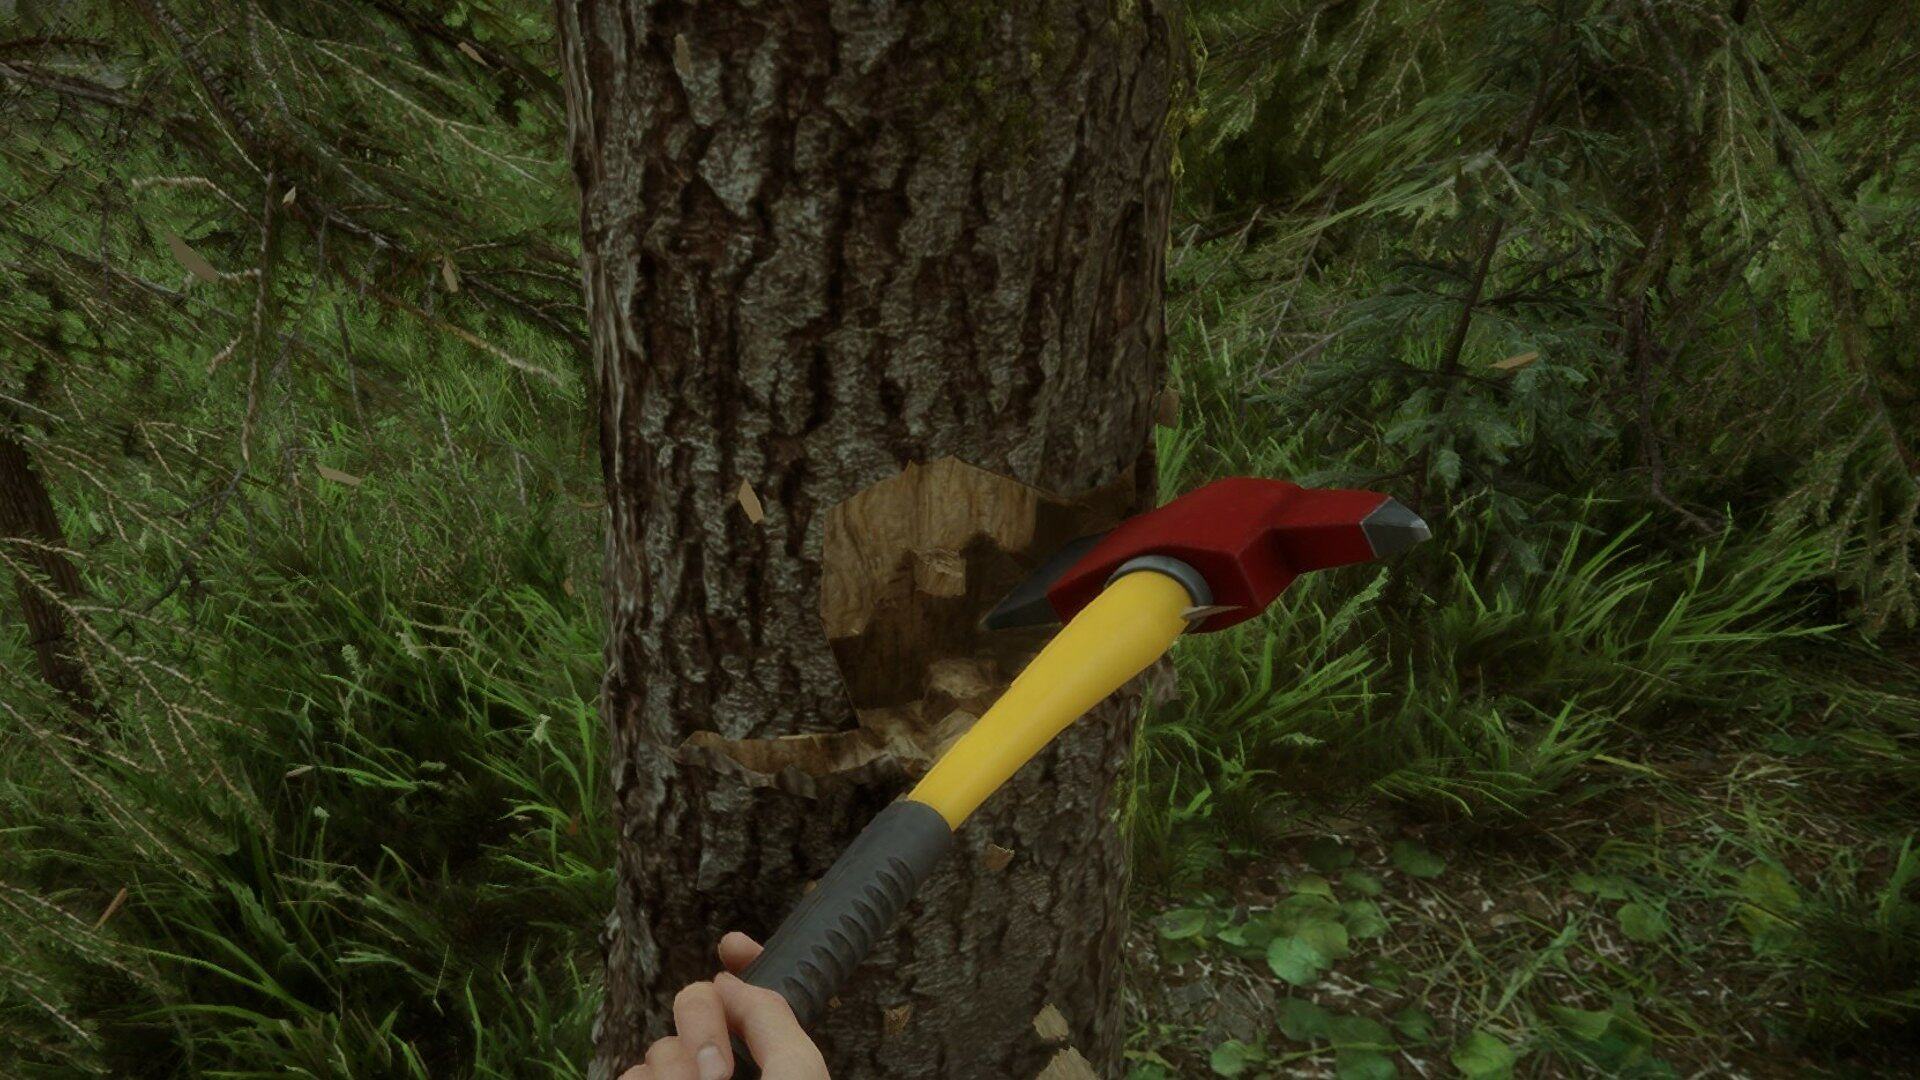 Players use fire axes to cut down trees in Children of the Forest.